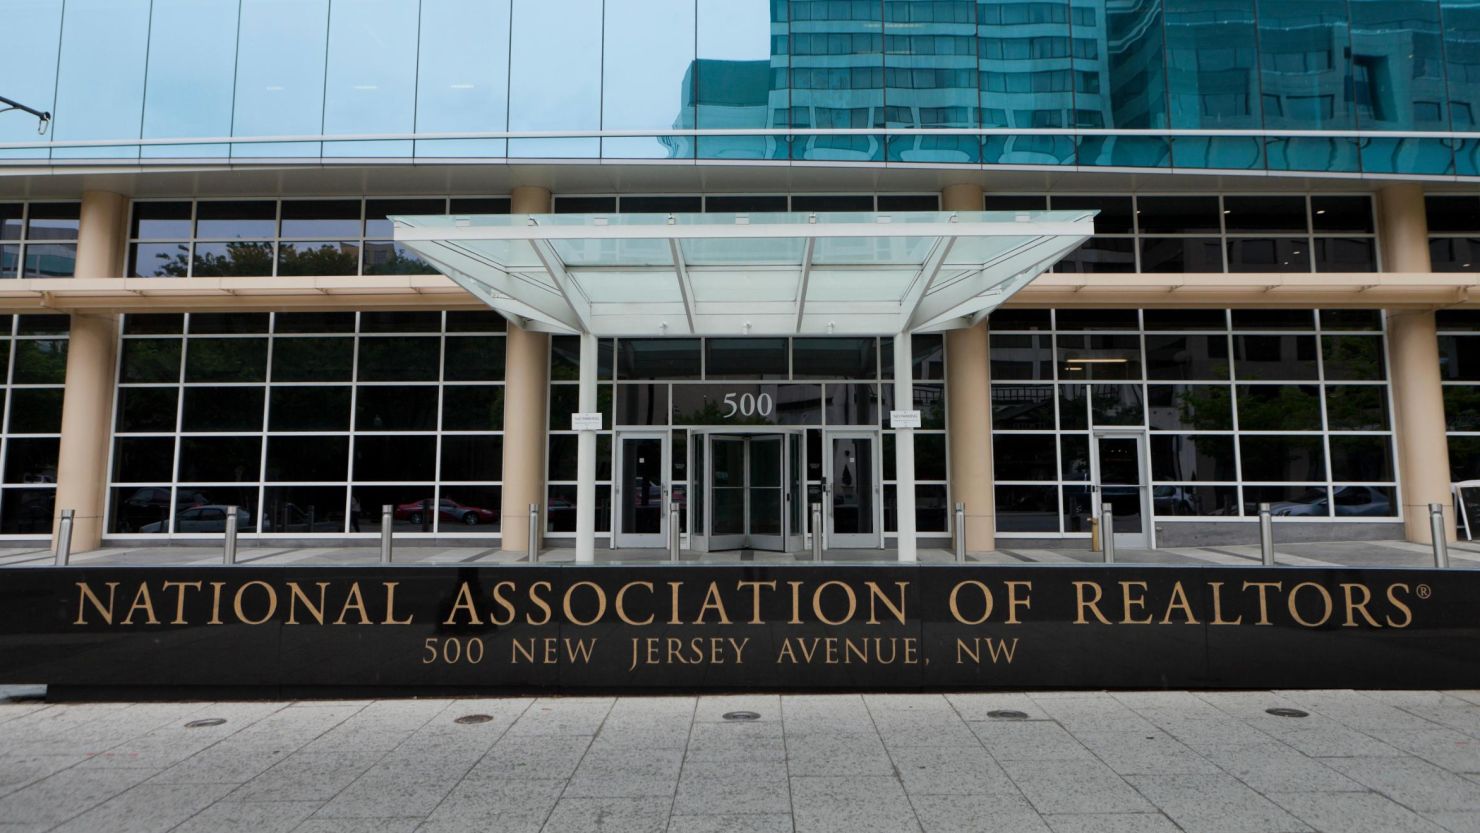 NAR has worked to control access to nearly every home listing in the country. With over a million members, it is the largest professional association in the country.